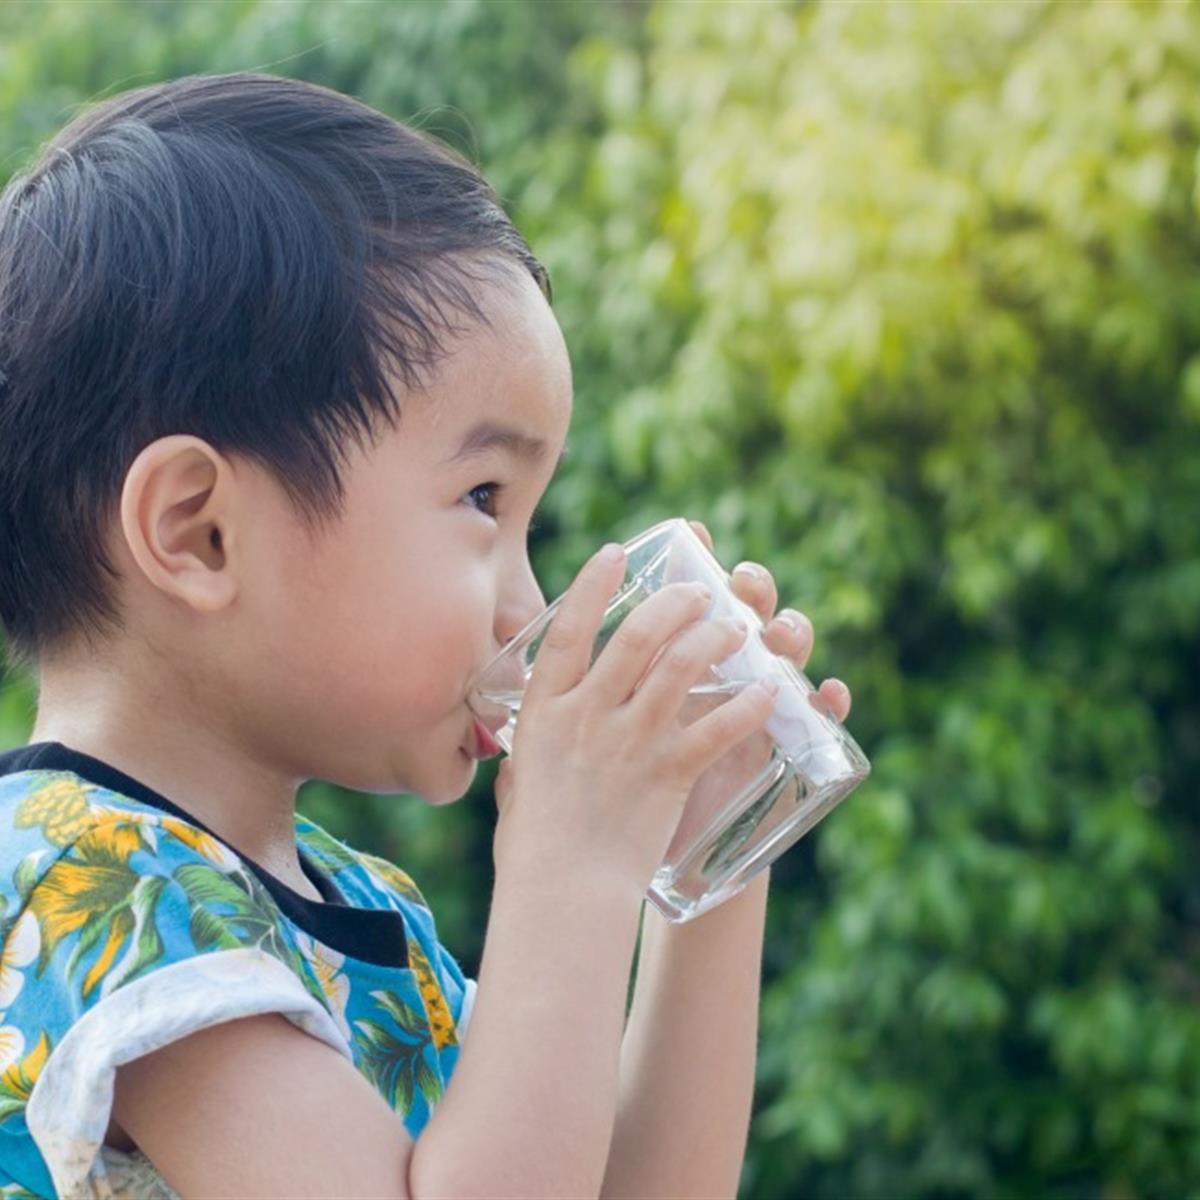 Recommended Drinks for Children Age 5 & Younger - HealthyChildren.org